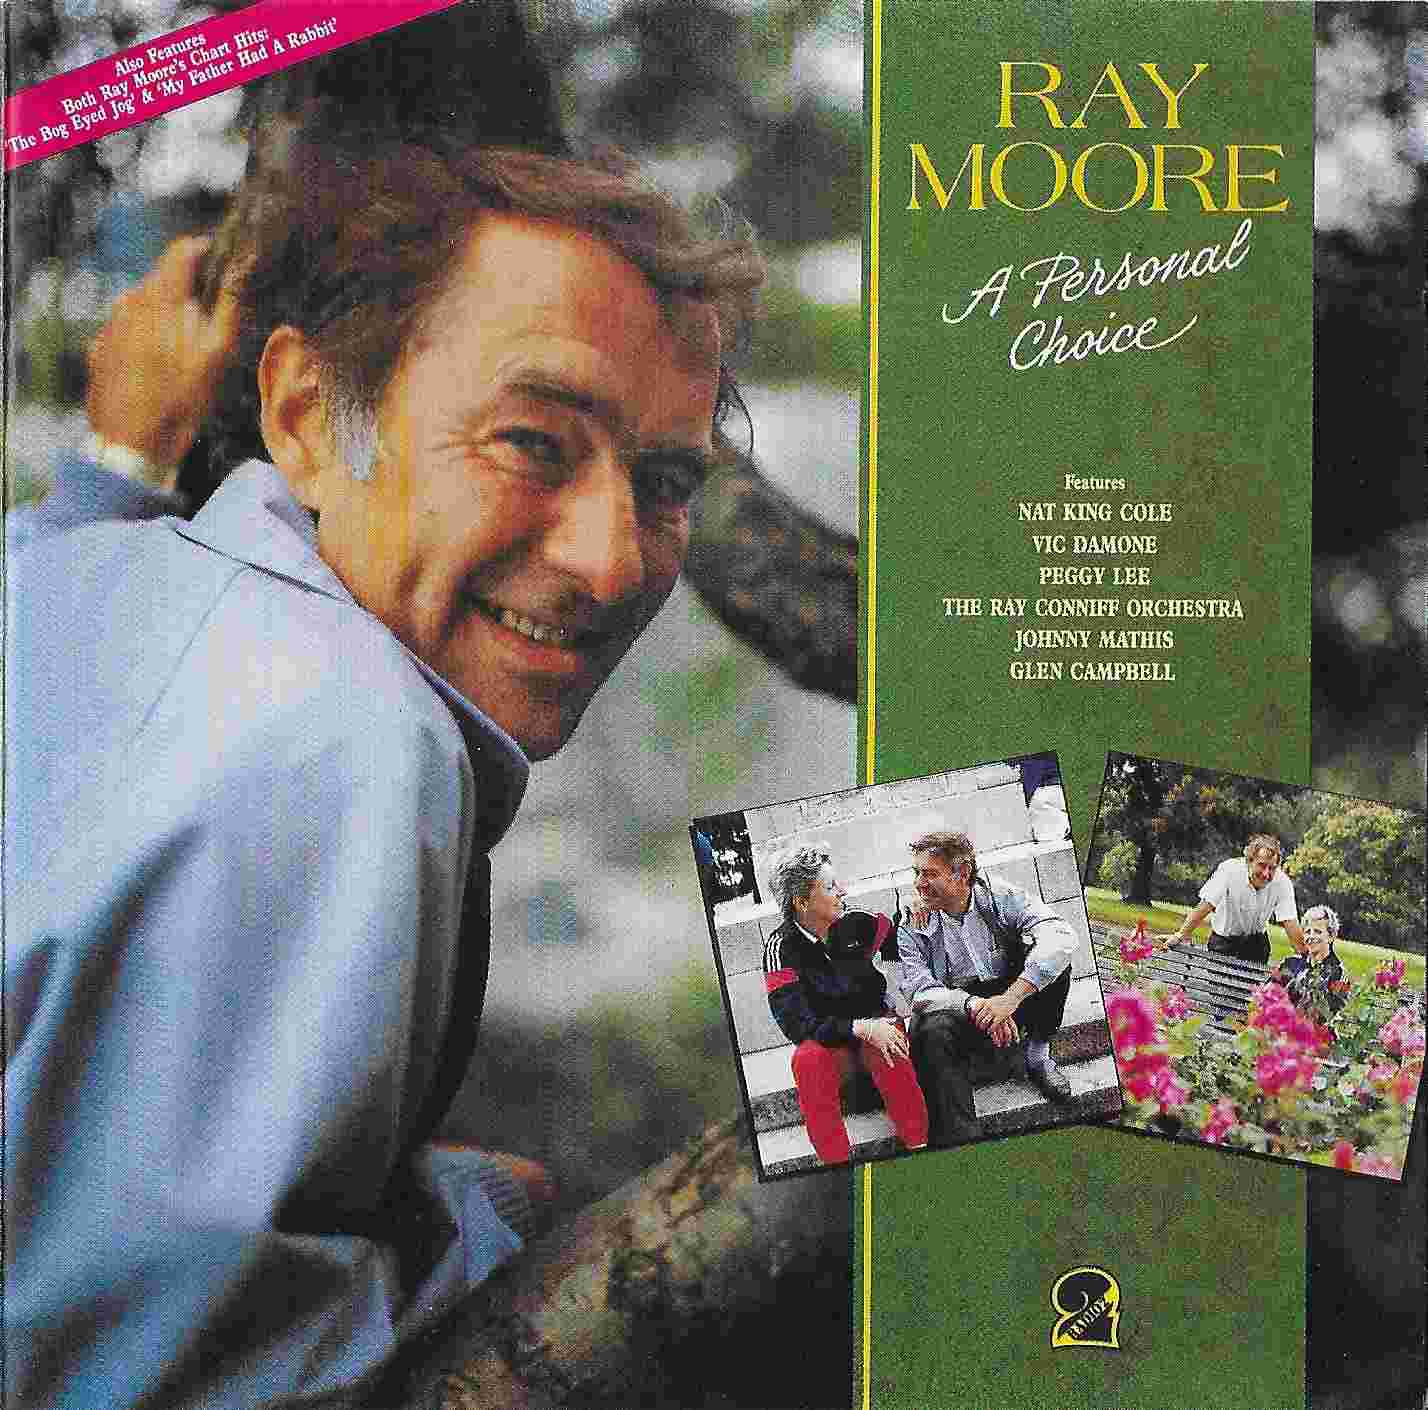 Picture of BBCCD713 Ray Moore - A personal choice by artist Ray Moore  from the BBC cds - Records and Tapes library